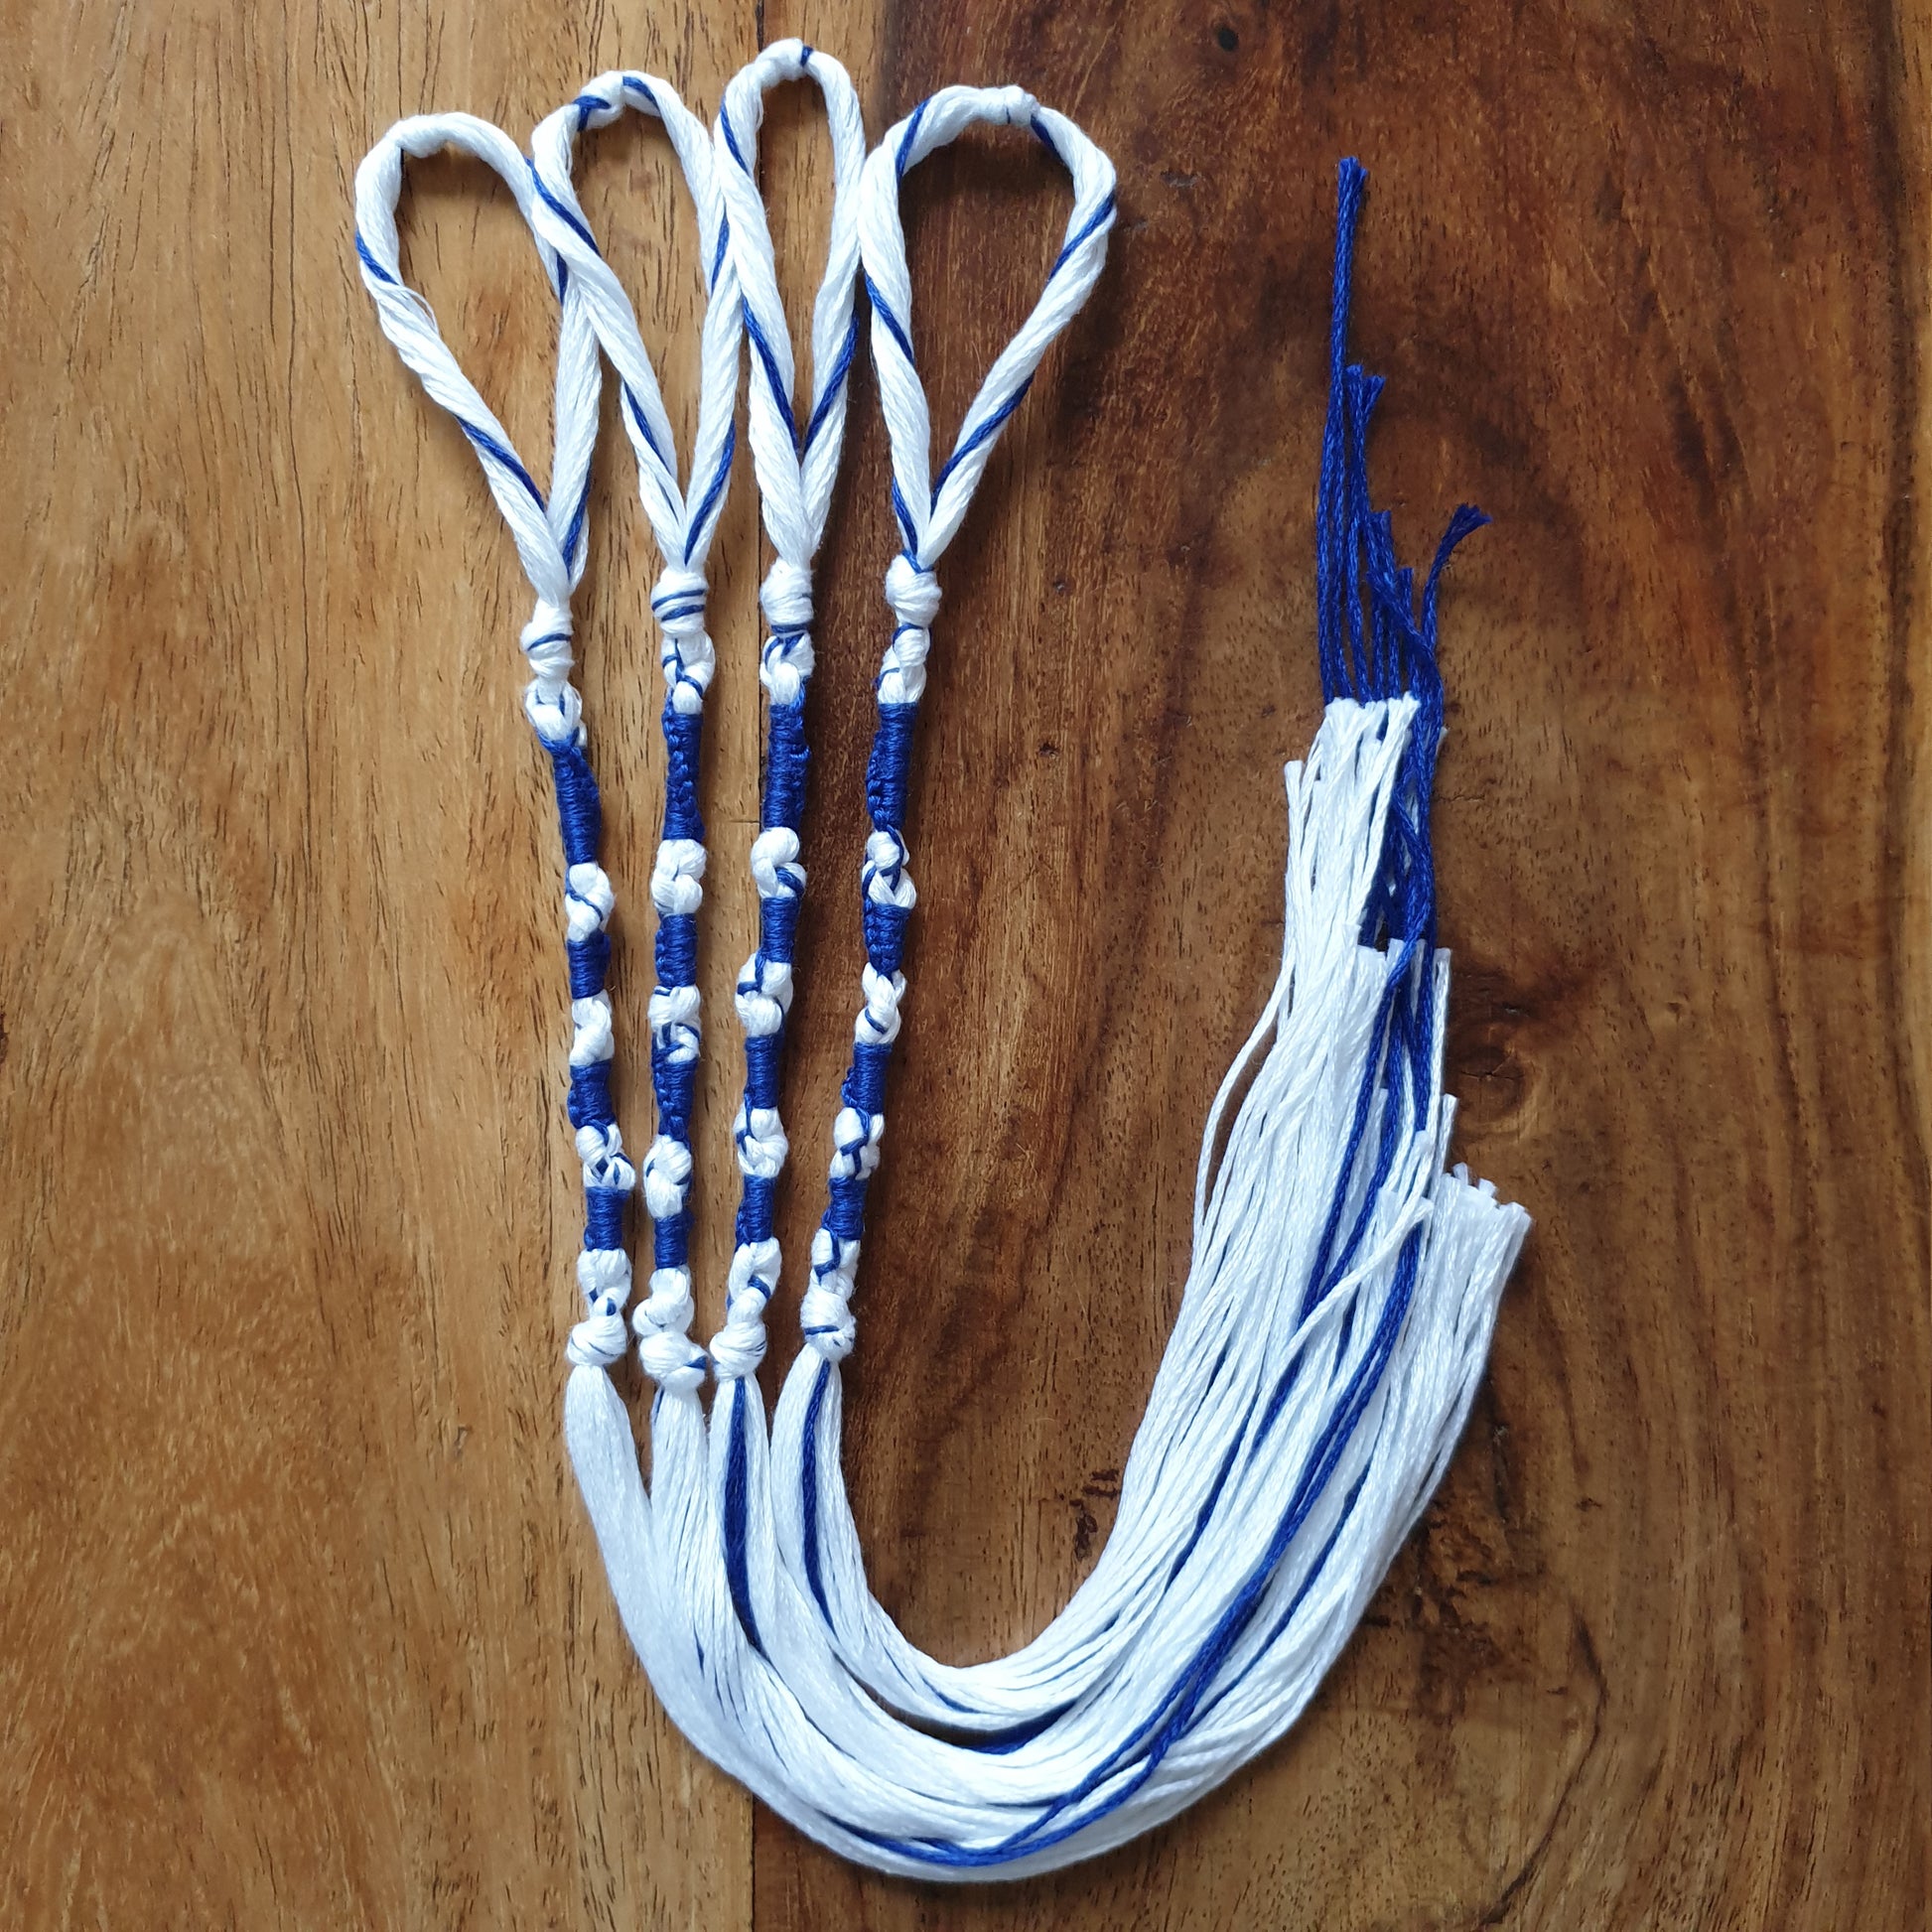 Tzitzit set of 4 - White & Blue, Knotted YHWH (10-5-6-5), Traditional Tassels, Torah Fringe